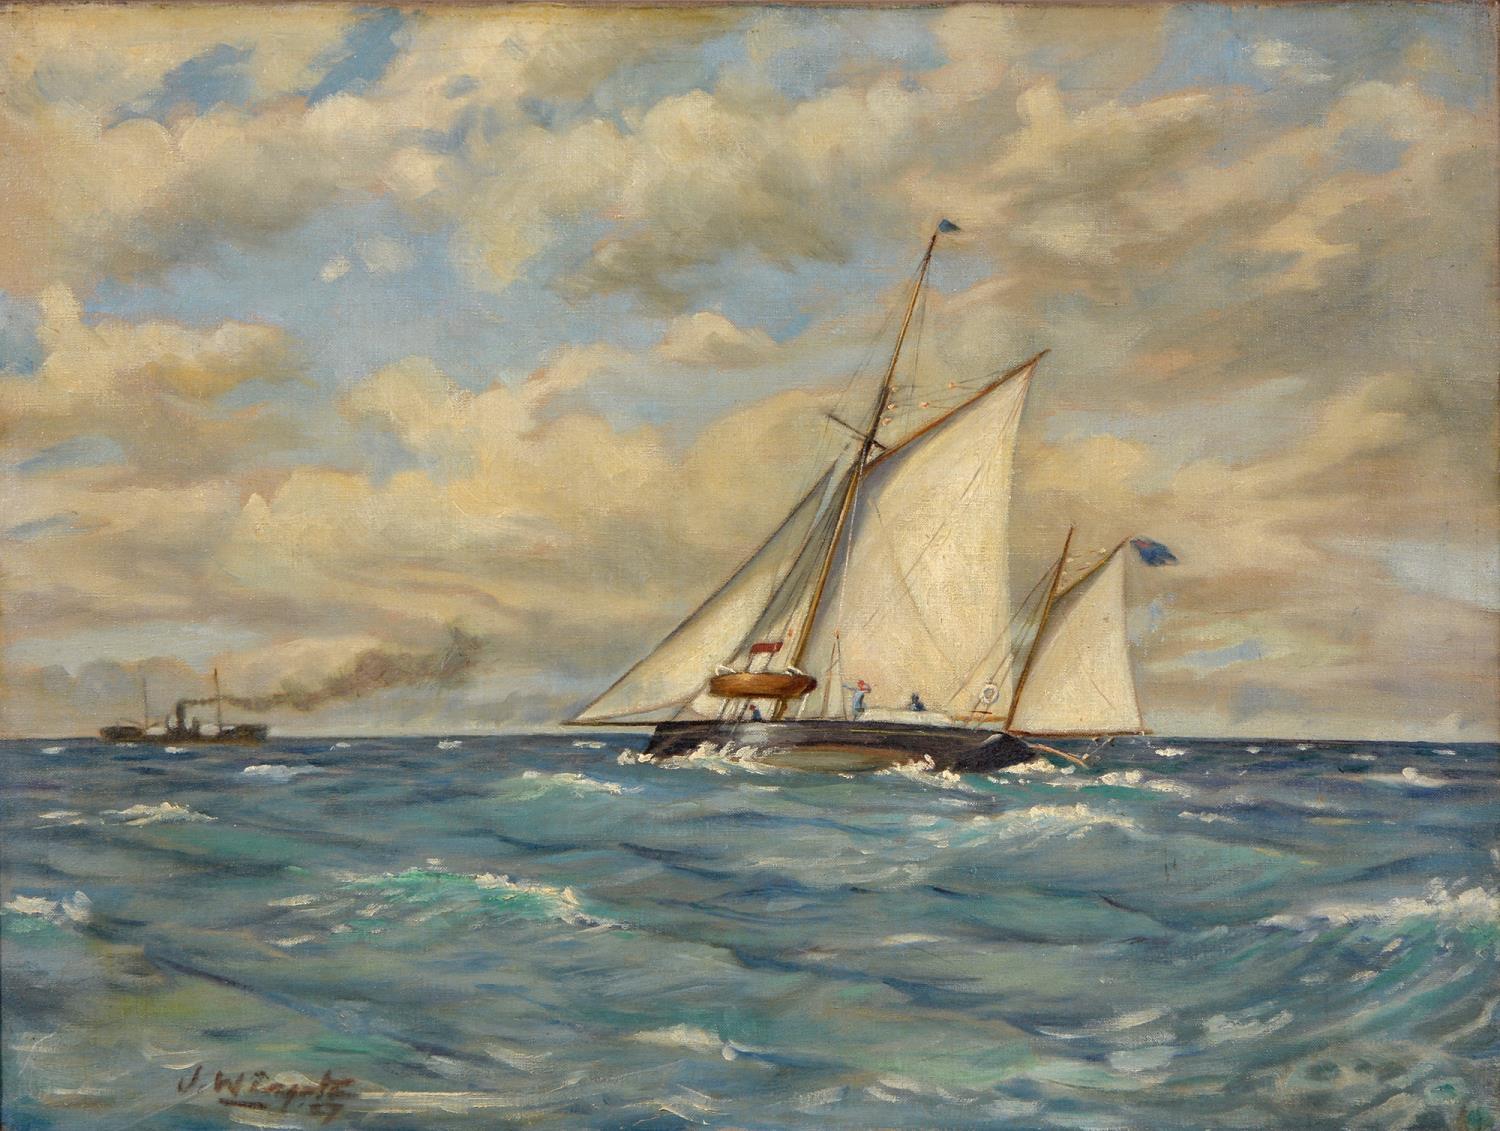 J. Wingate  Figurative Painting - English Impressionist Signed Oil Painting Sailing Yacht at Sea with Tug Boat 